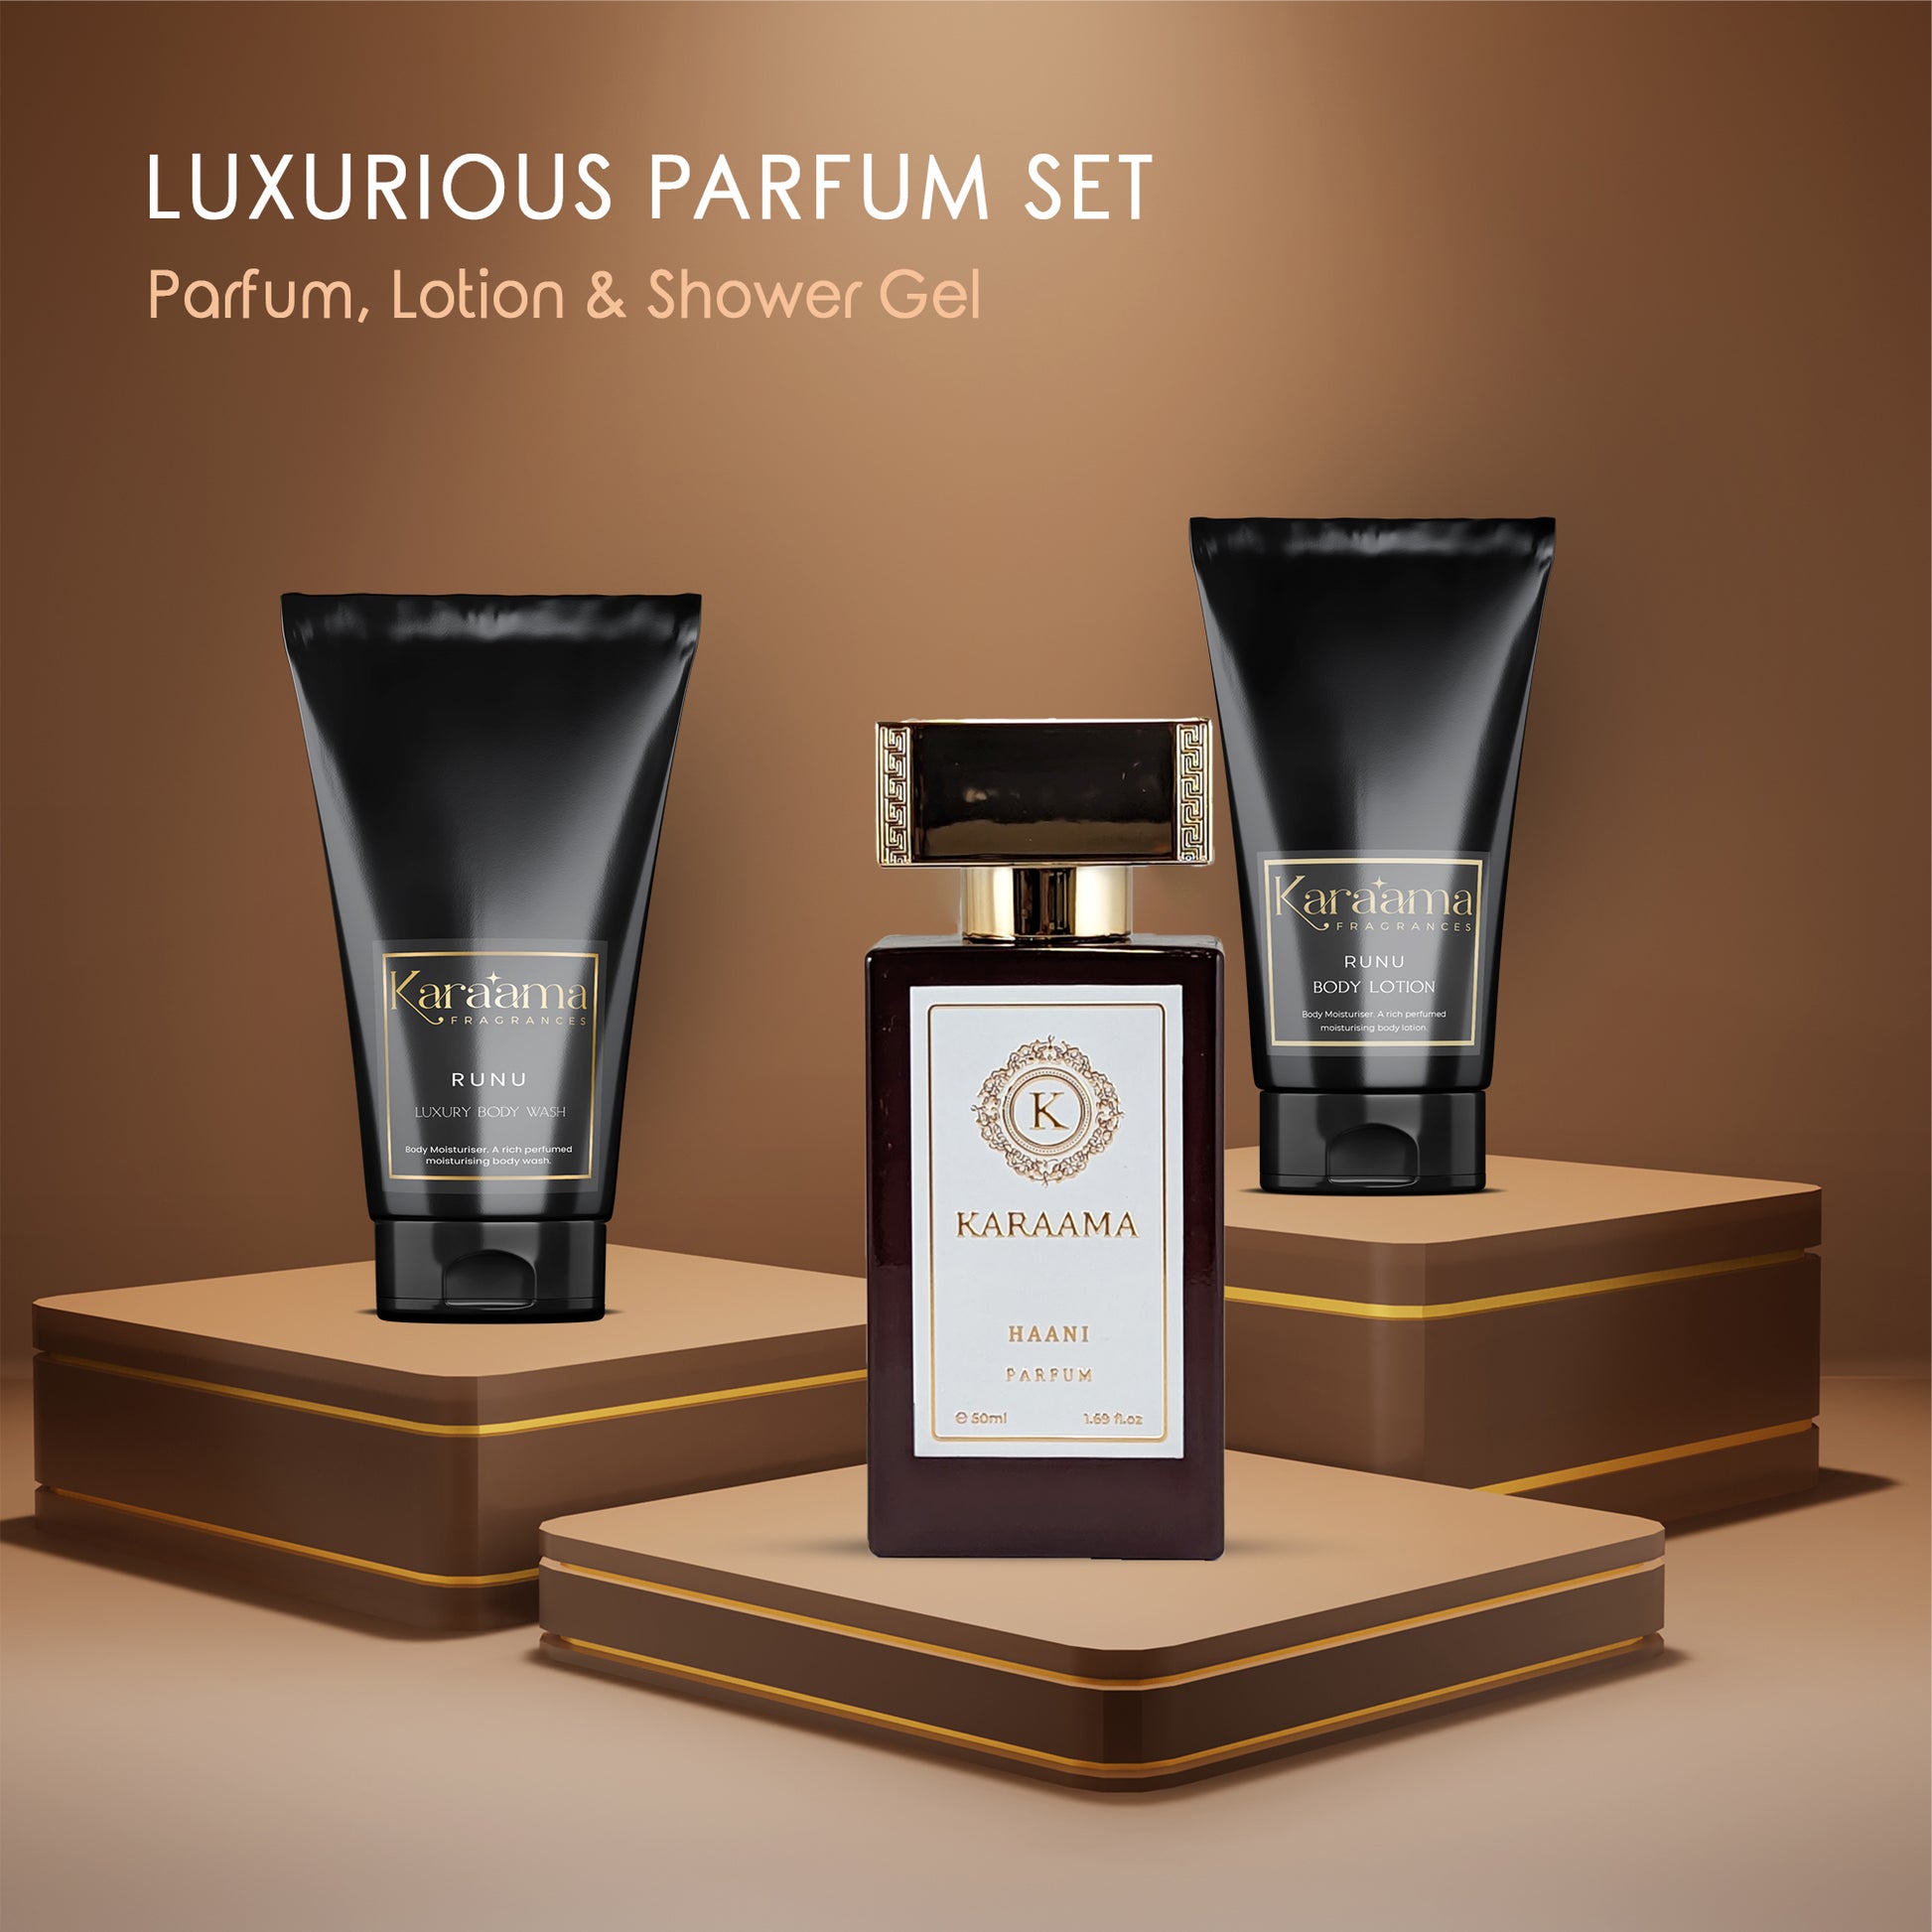 Discover the elegance with KARAAMA's Luxurious Parfum Set: featuring Haani Parfum, Body Lotion & Shower Gel. Indulge in sophistication for your beauty regimen. #LuxuryBeauty #PerfumeSet #KaraamaCollection #PersonalCareTrends #AromaticLuxury #GiftIdeas